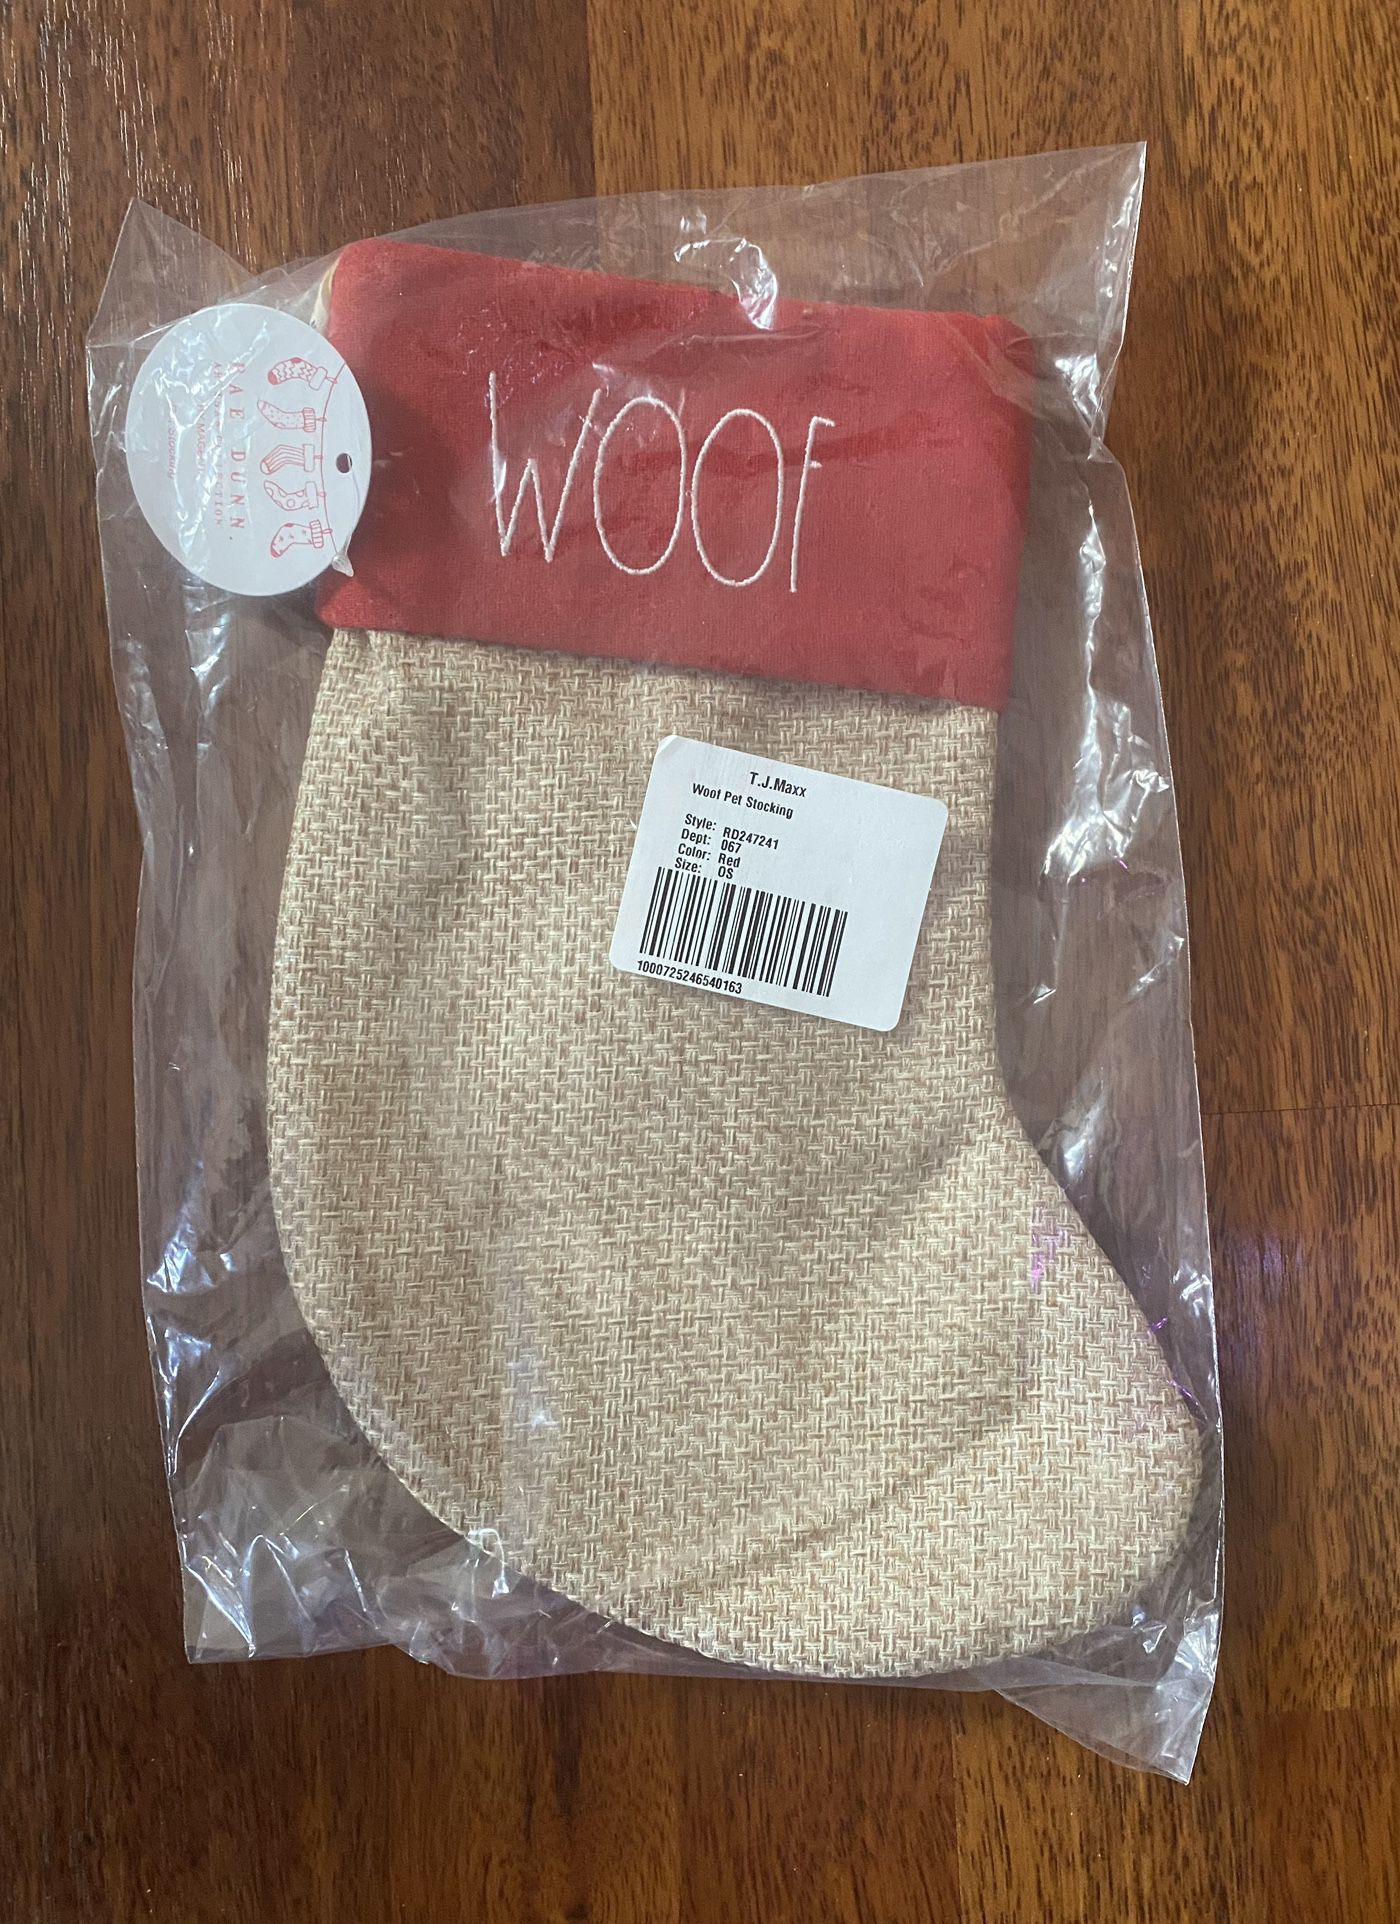 New Rae Dunn Woof Pet Holiday Stocking 11 1/2” H x 8” W